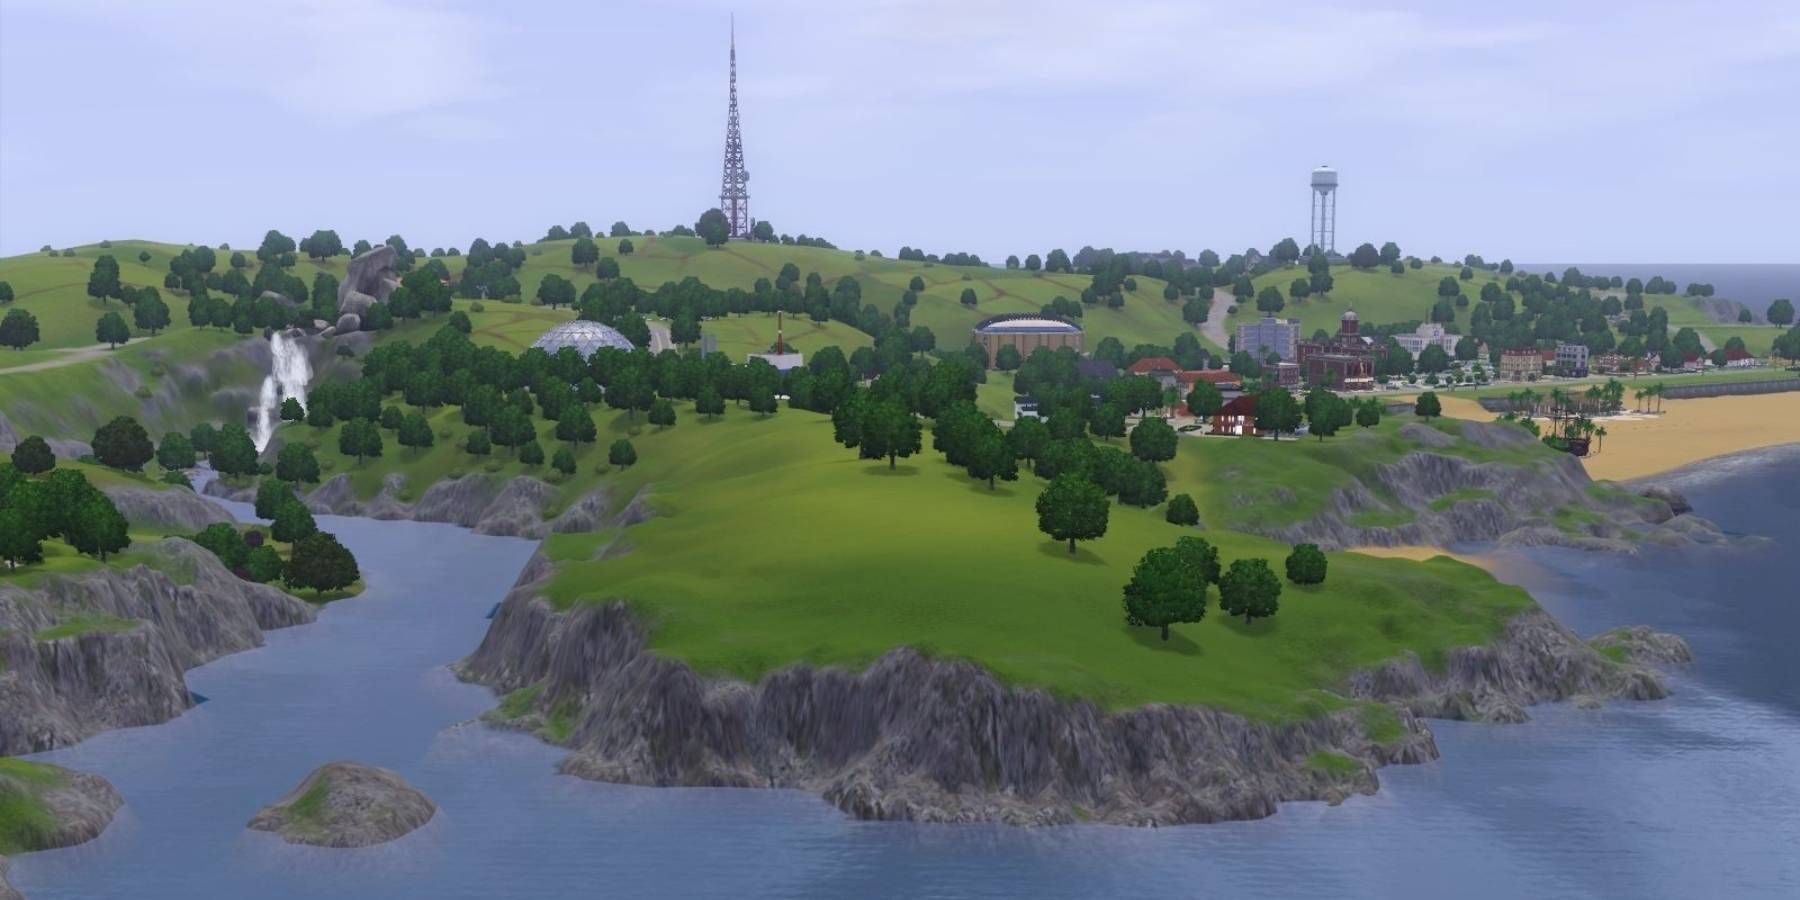 Barnacle Bay from The Sims 3